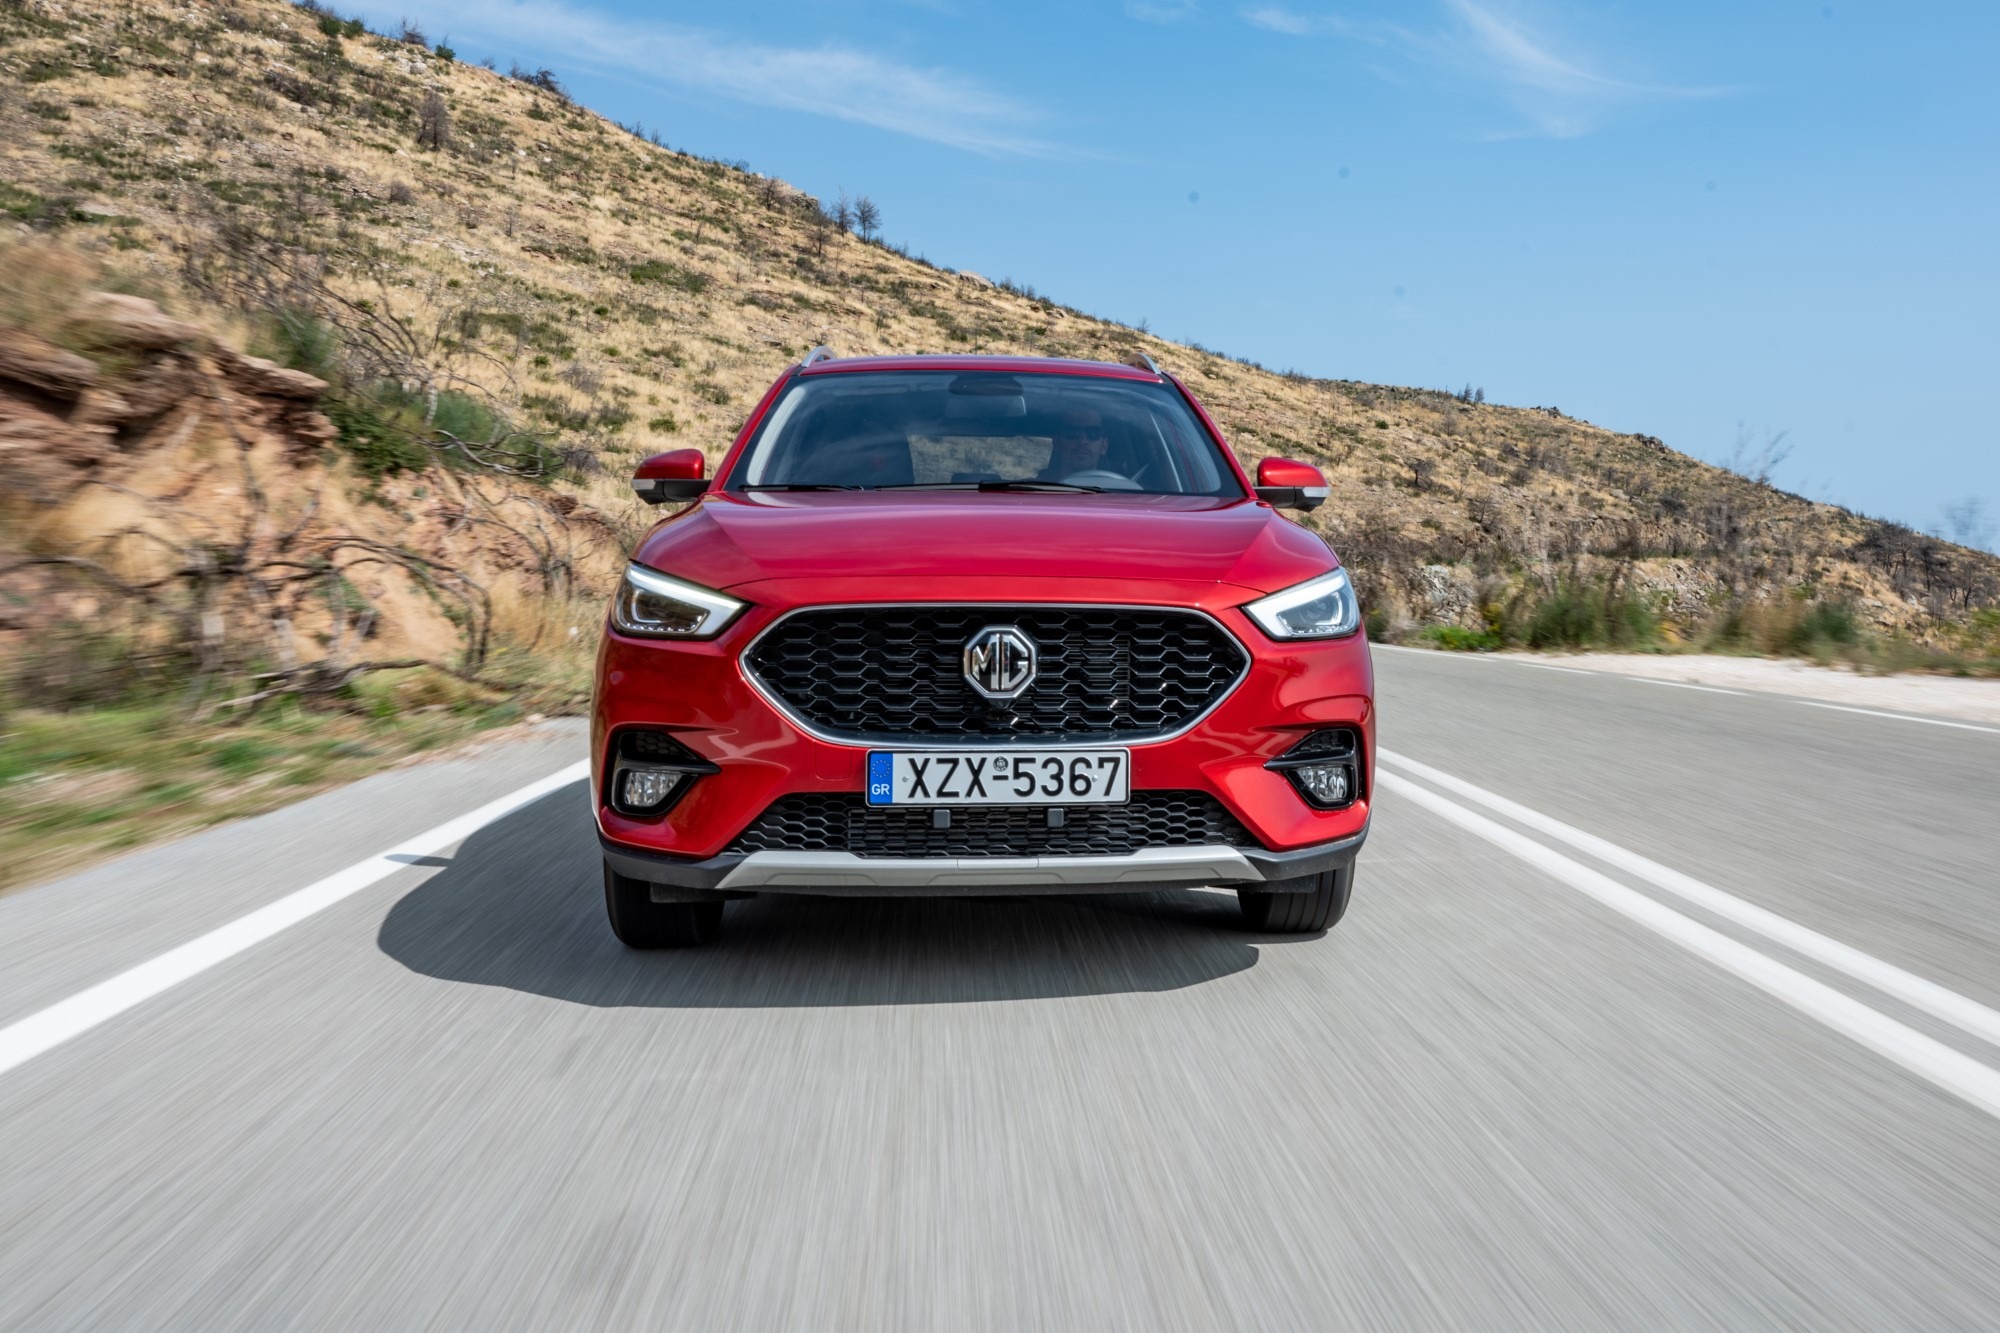 Test: MG ZS 1.0T Auto 111Ps